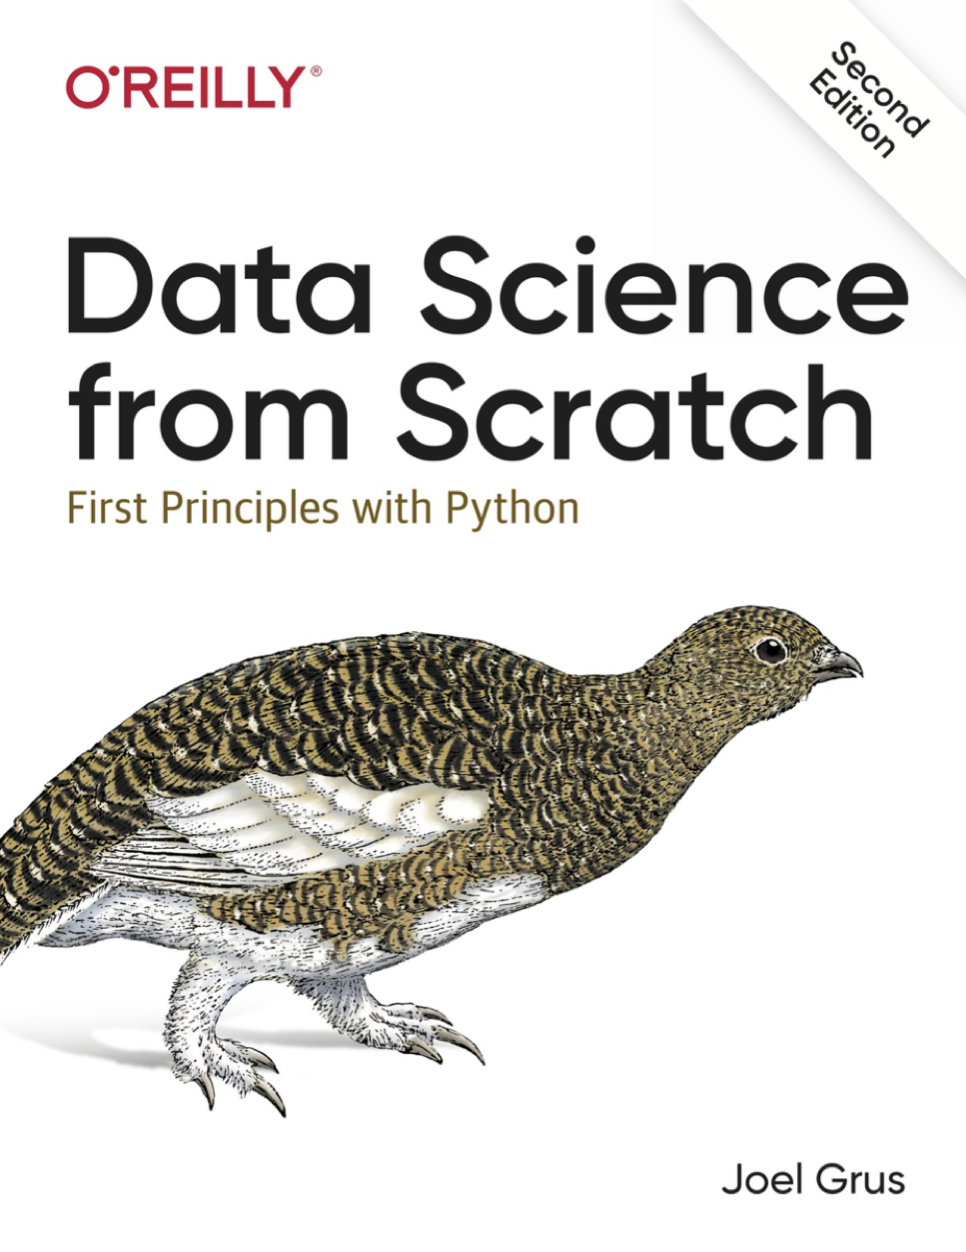 data-science-from-scratch-first-principles-with-python.jpg